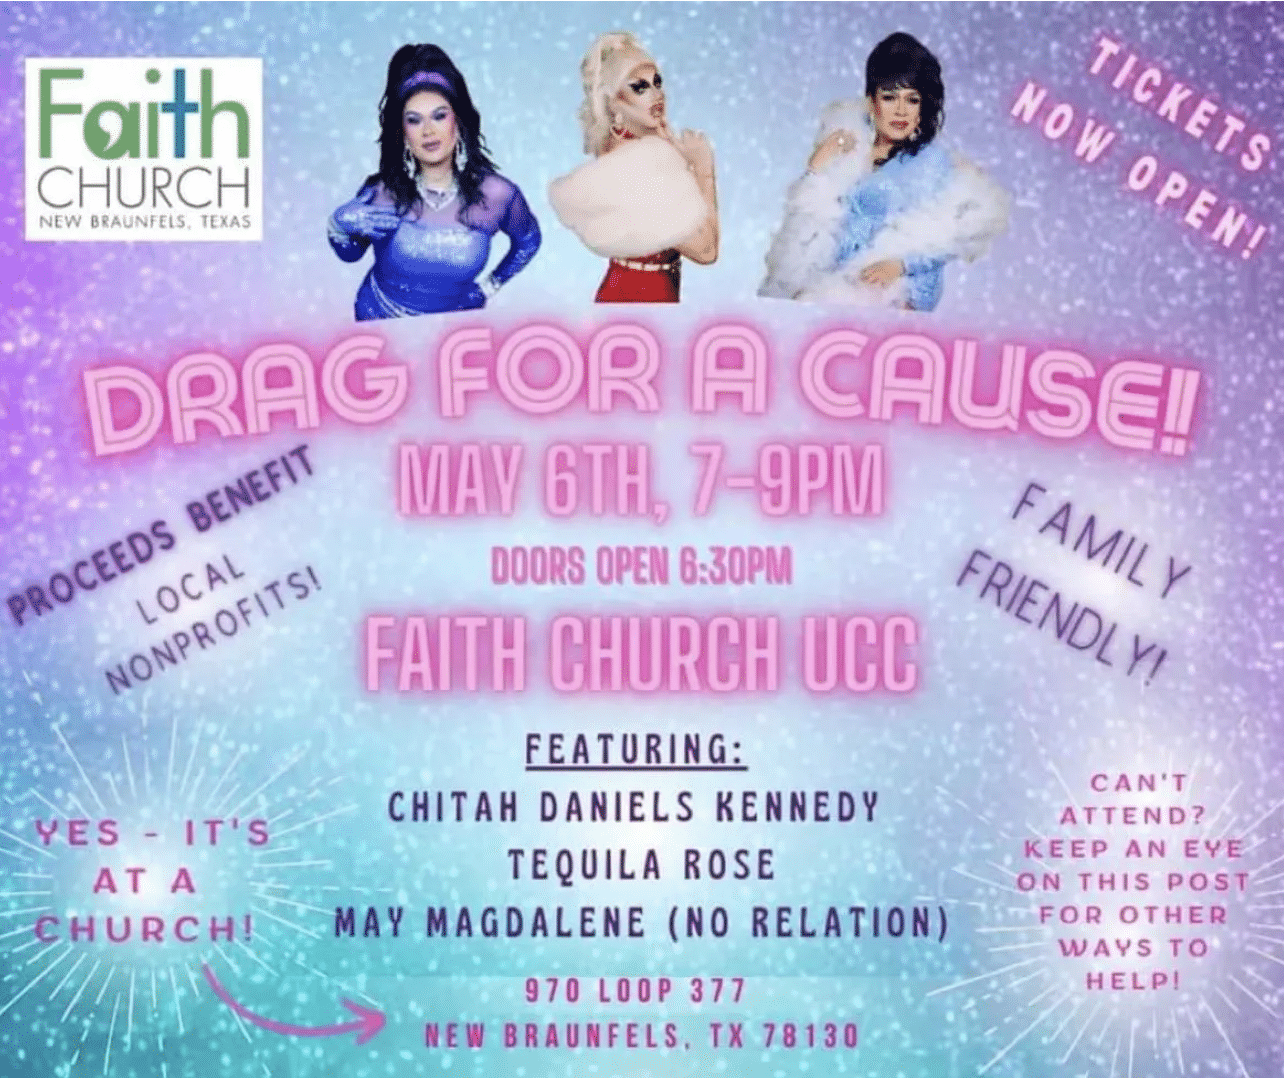 Texas Church to Host ‘Family-Friendly’ Drag Show in the presence of children